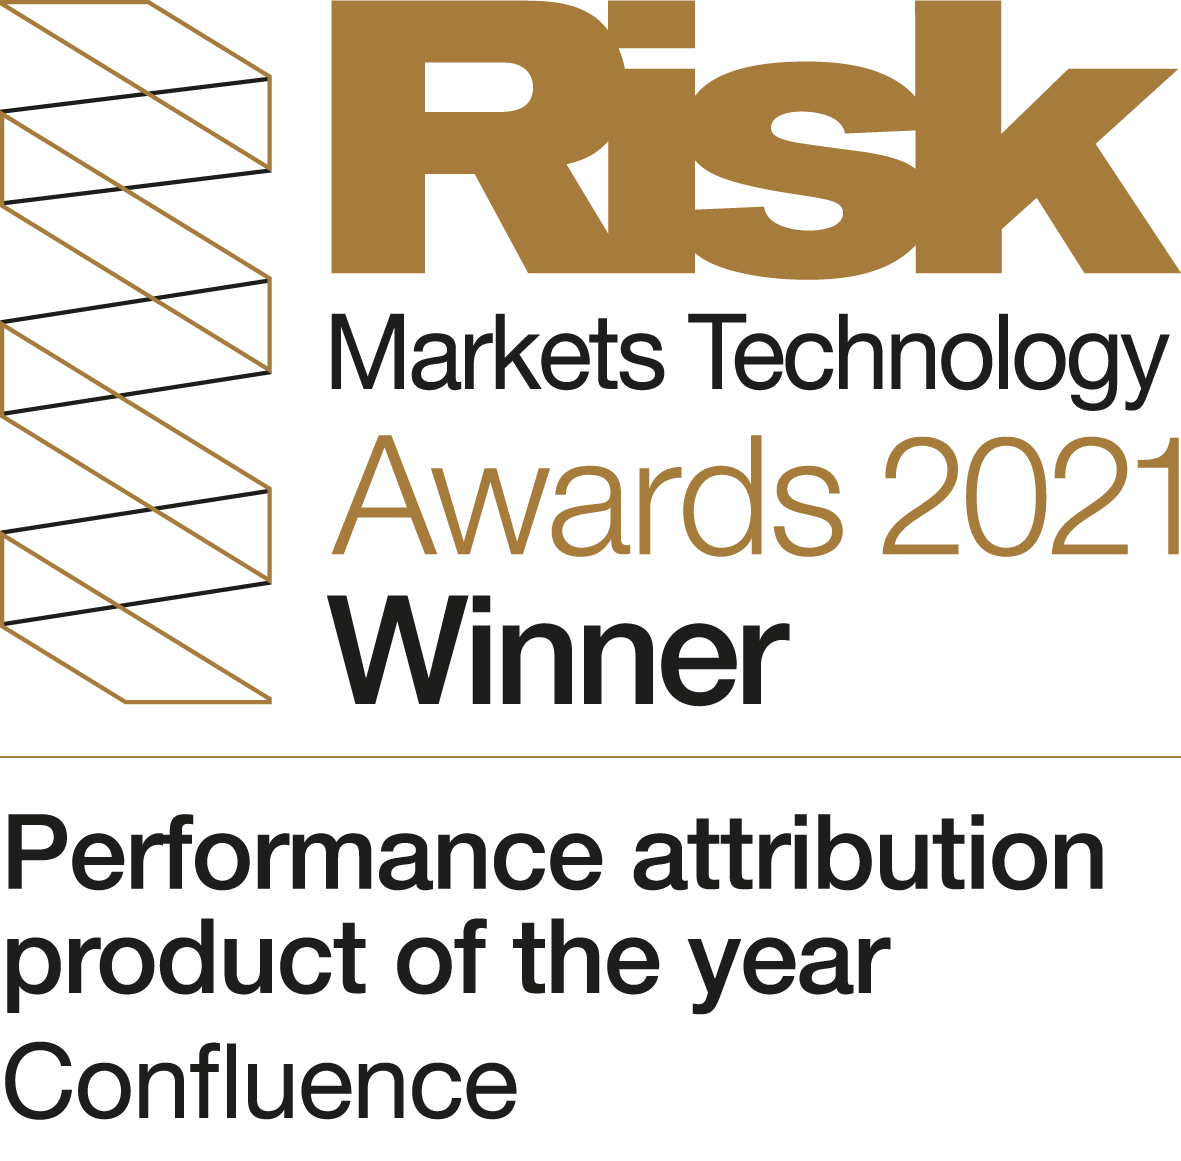 RMTA 2021 winner Performance attribution product of the year - Confluence (Logo)